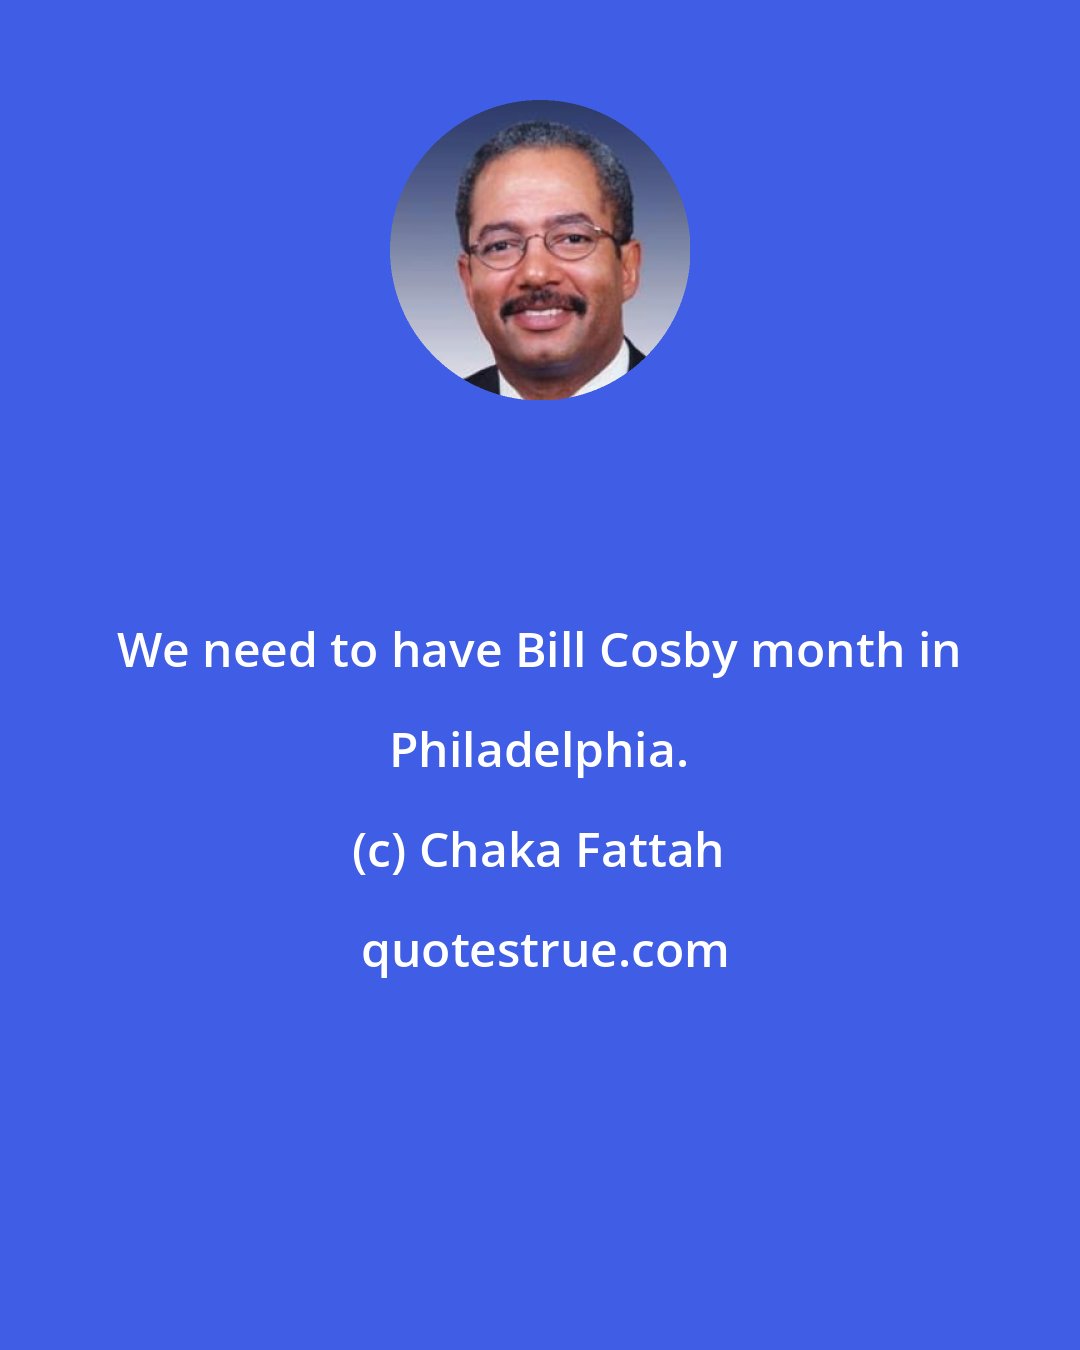 Chaka Fattah: We need to have Bill Cosby month in Philadelphia.